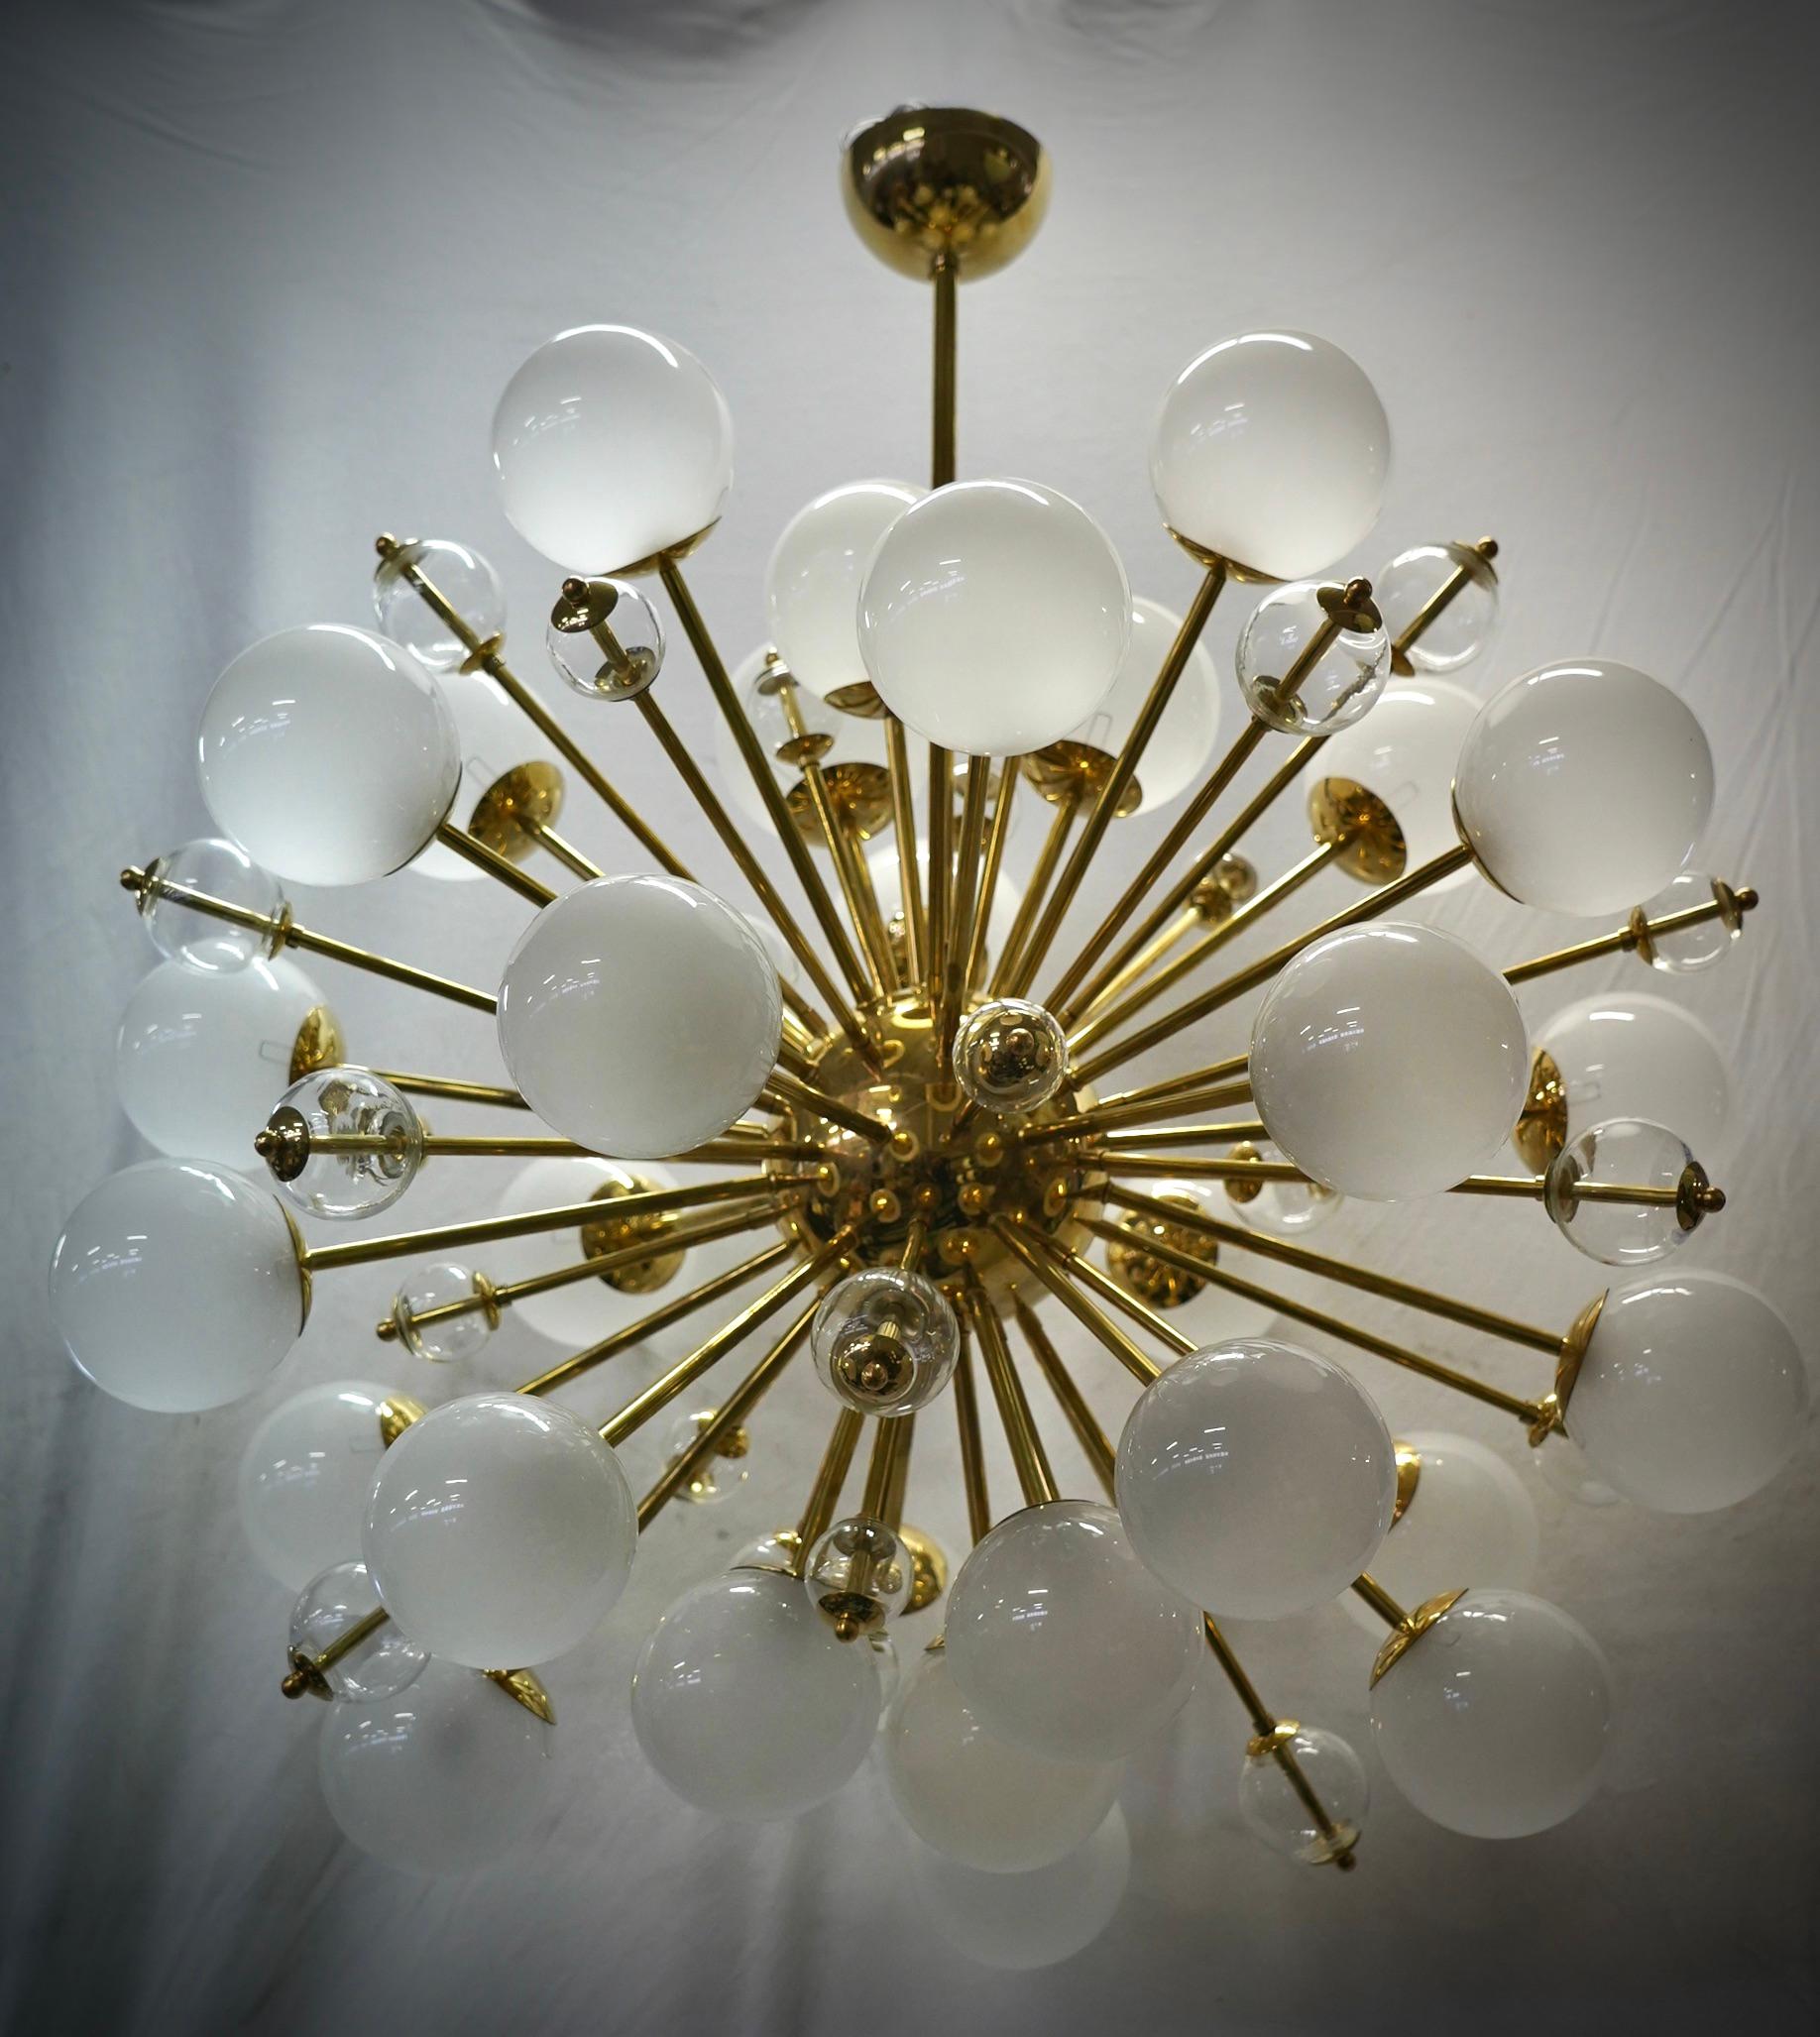 A fantastic spot of ice white color, amazing design due to its very particular shape of these glass spheres and for the fantastic brass rods. Very elegant, will furnish and decorate your whole room.

Structure completely in brass like a sputnik with